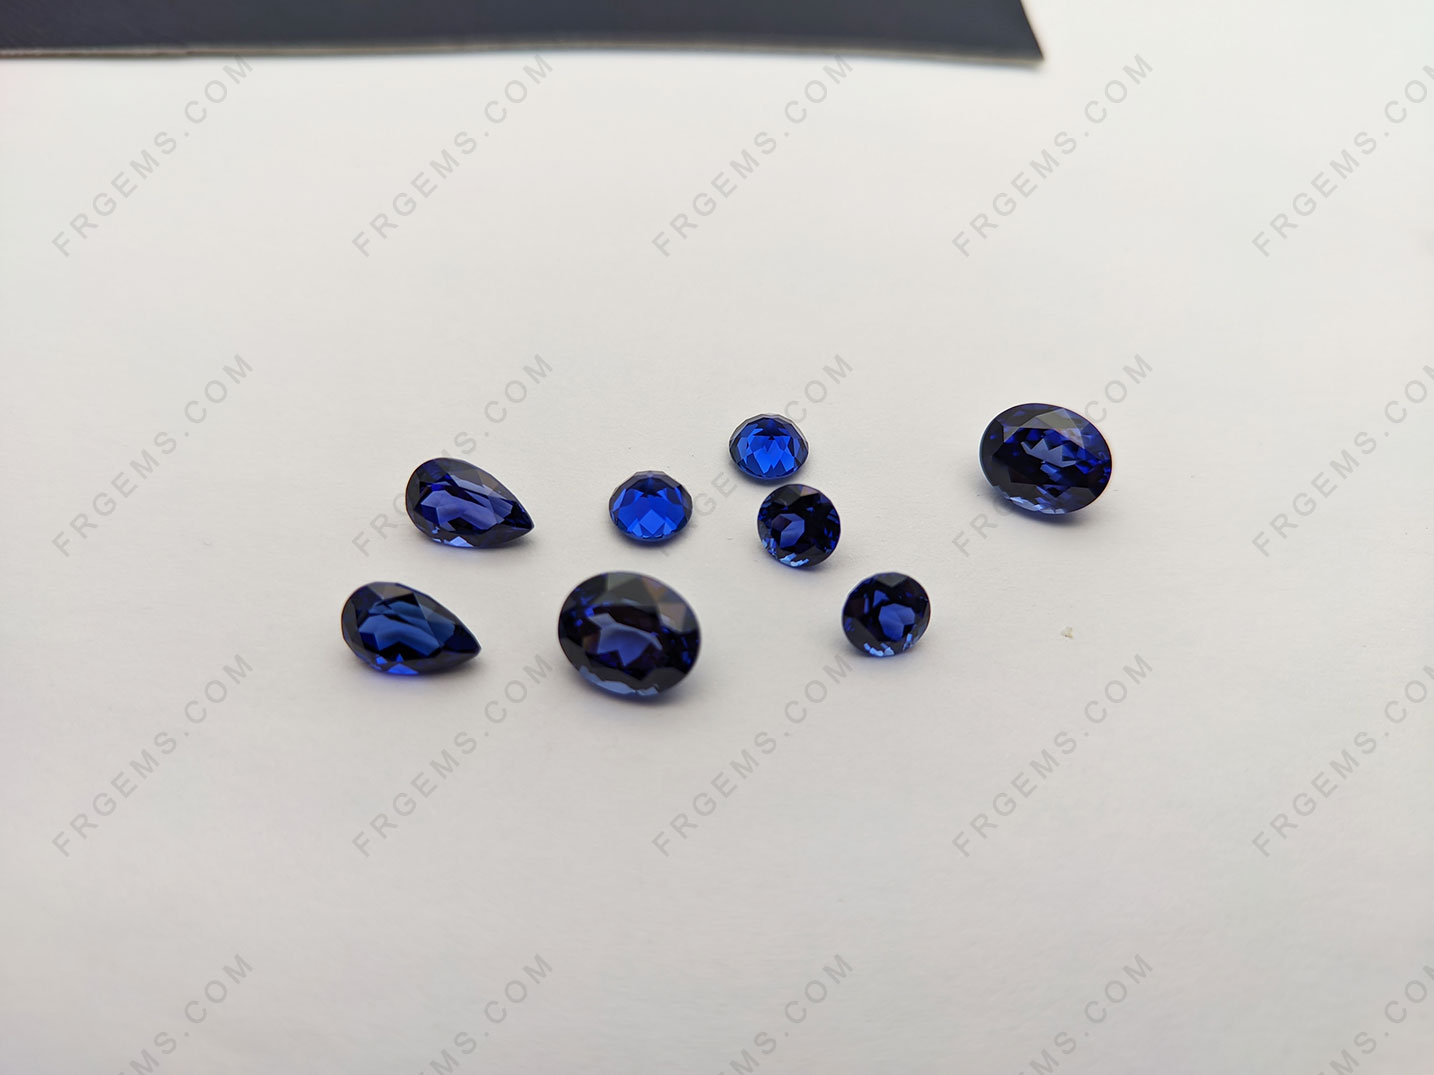 Lab Grown Pulled Czochralski Royal Blue Sapphire Color Oval Shaped Faceted cut 11x9mm Gemstone